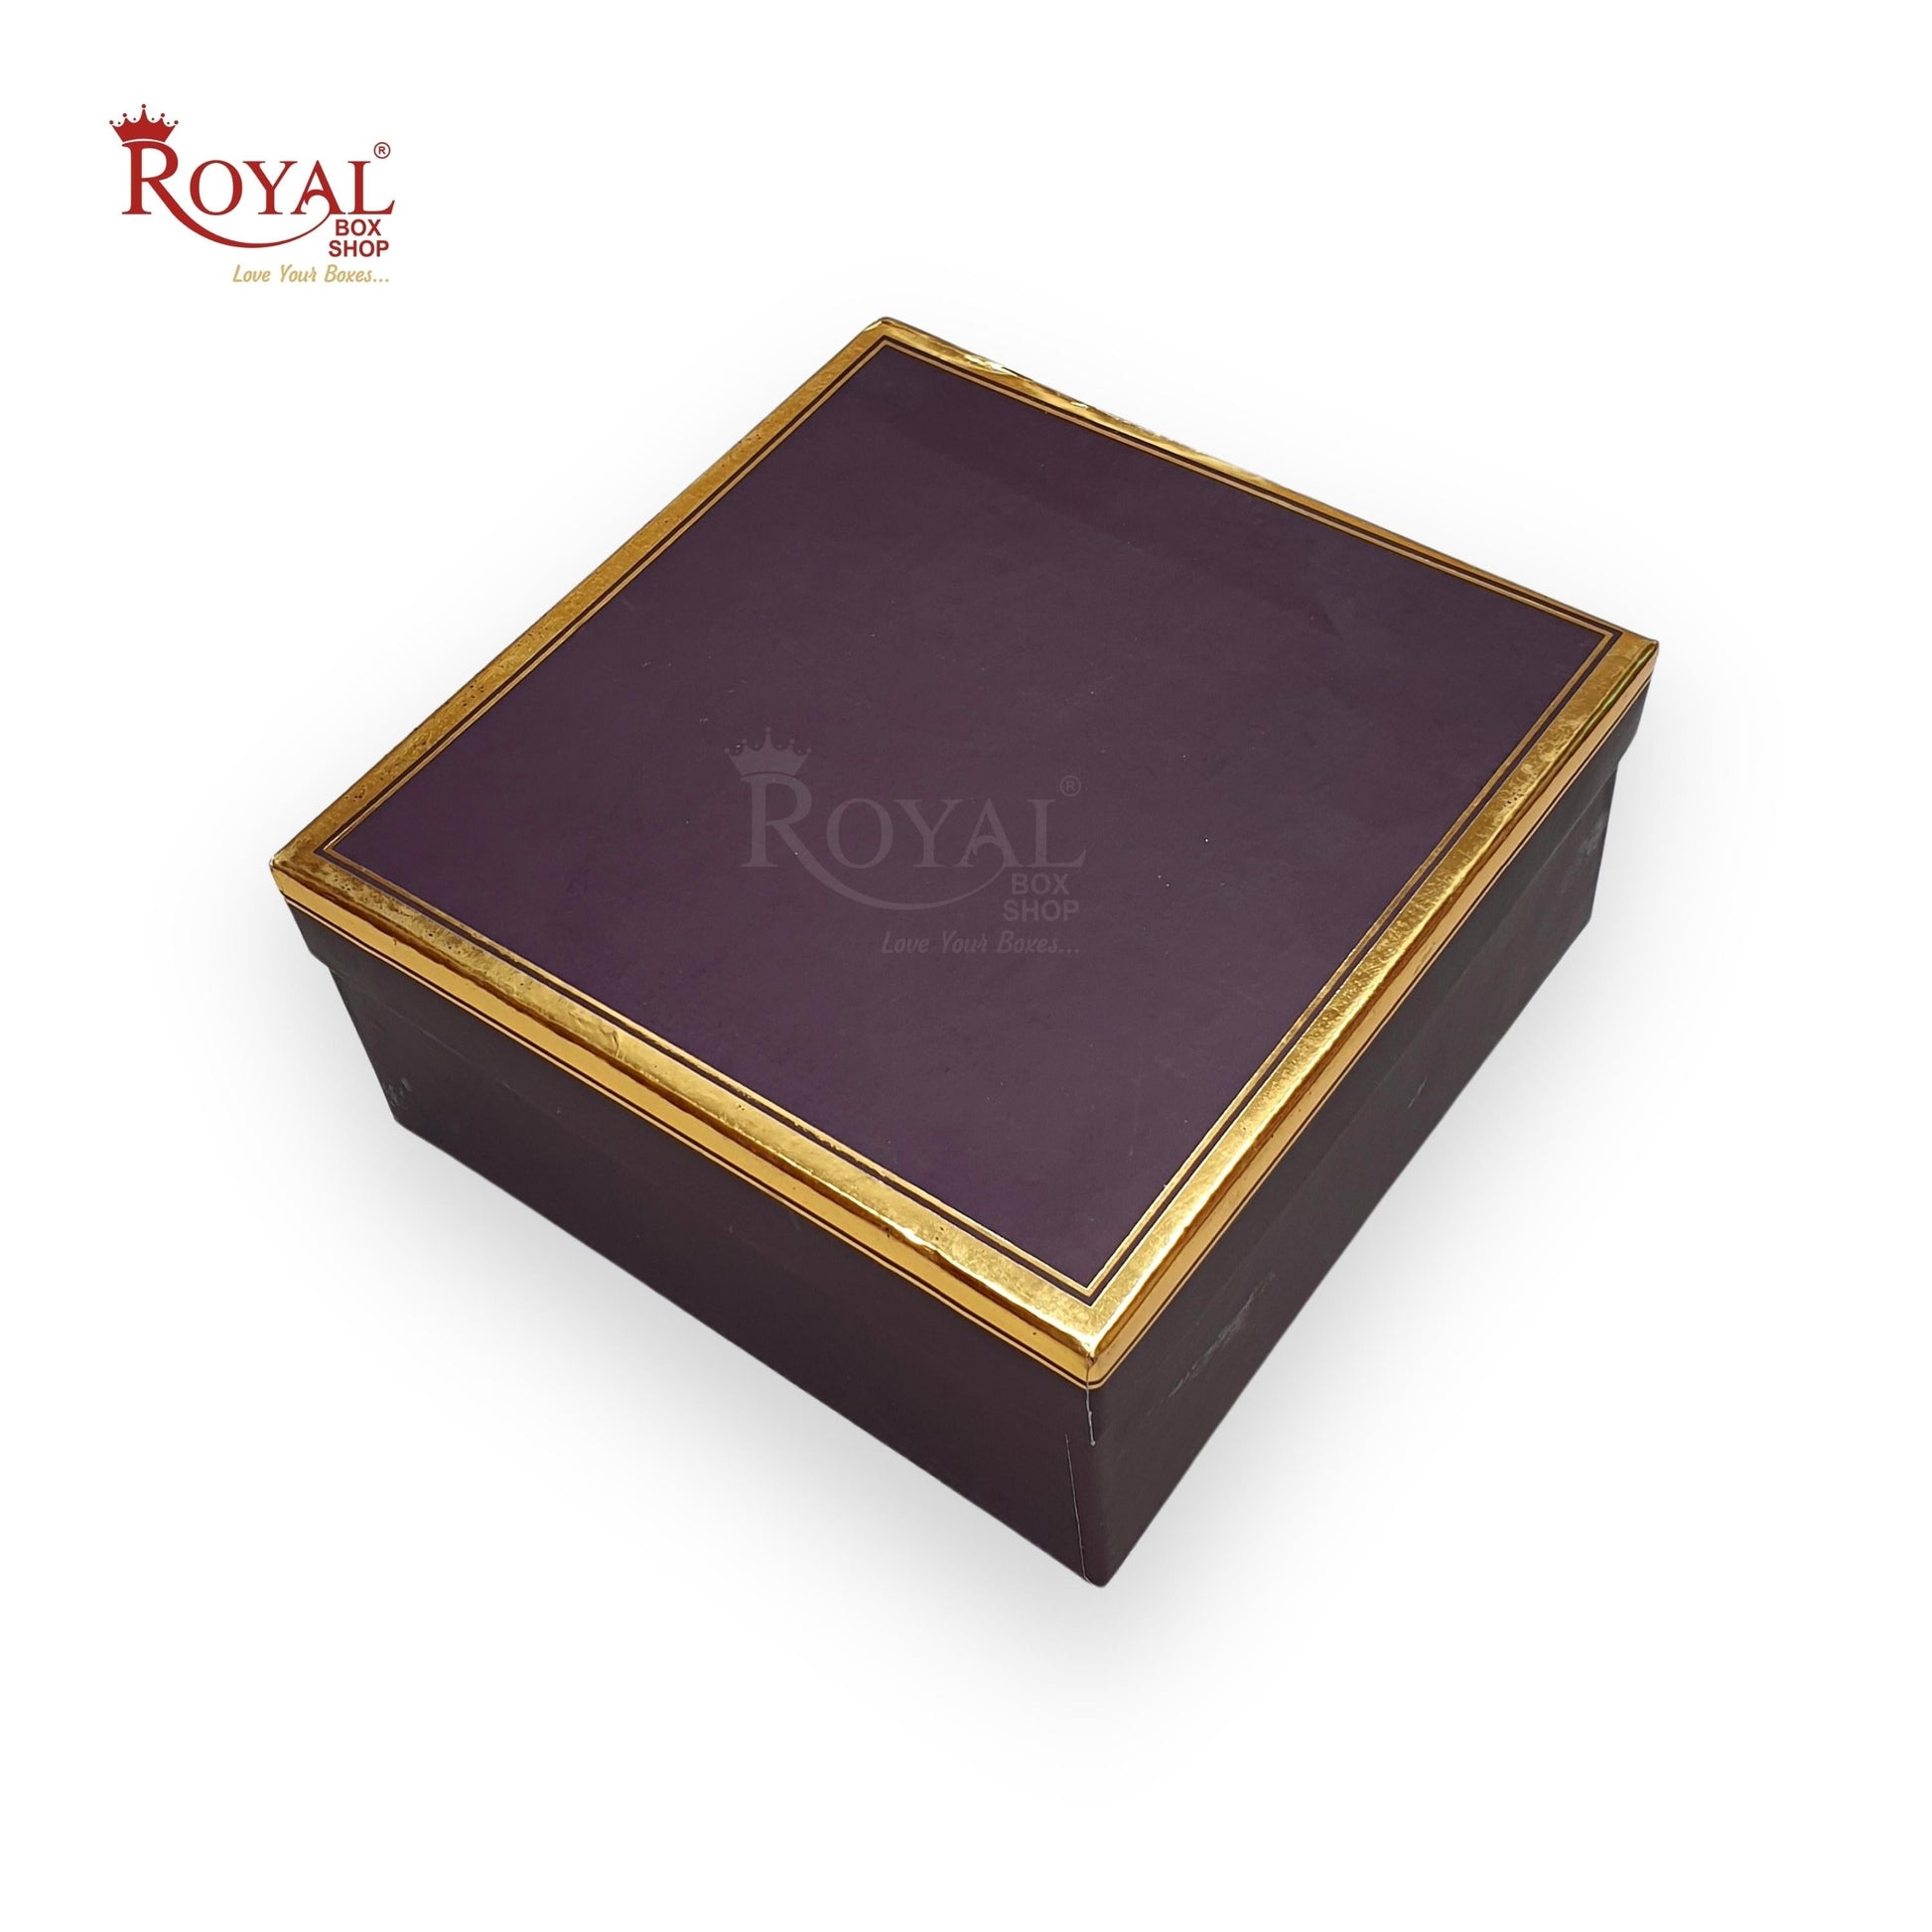 Hamper Gift Boxes I 7x7x3.5 Inches I Wine Color with Gold Foiling I For Return Wedding Corporate Hamper Gifts Box Royal Box Shop